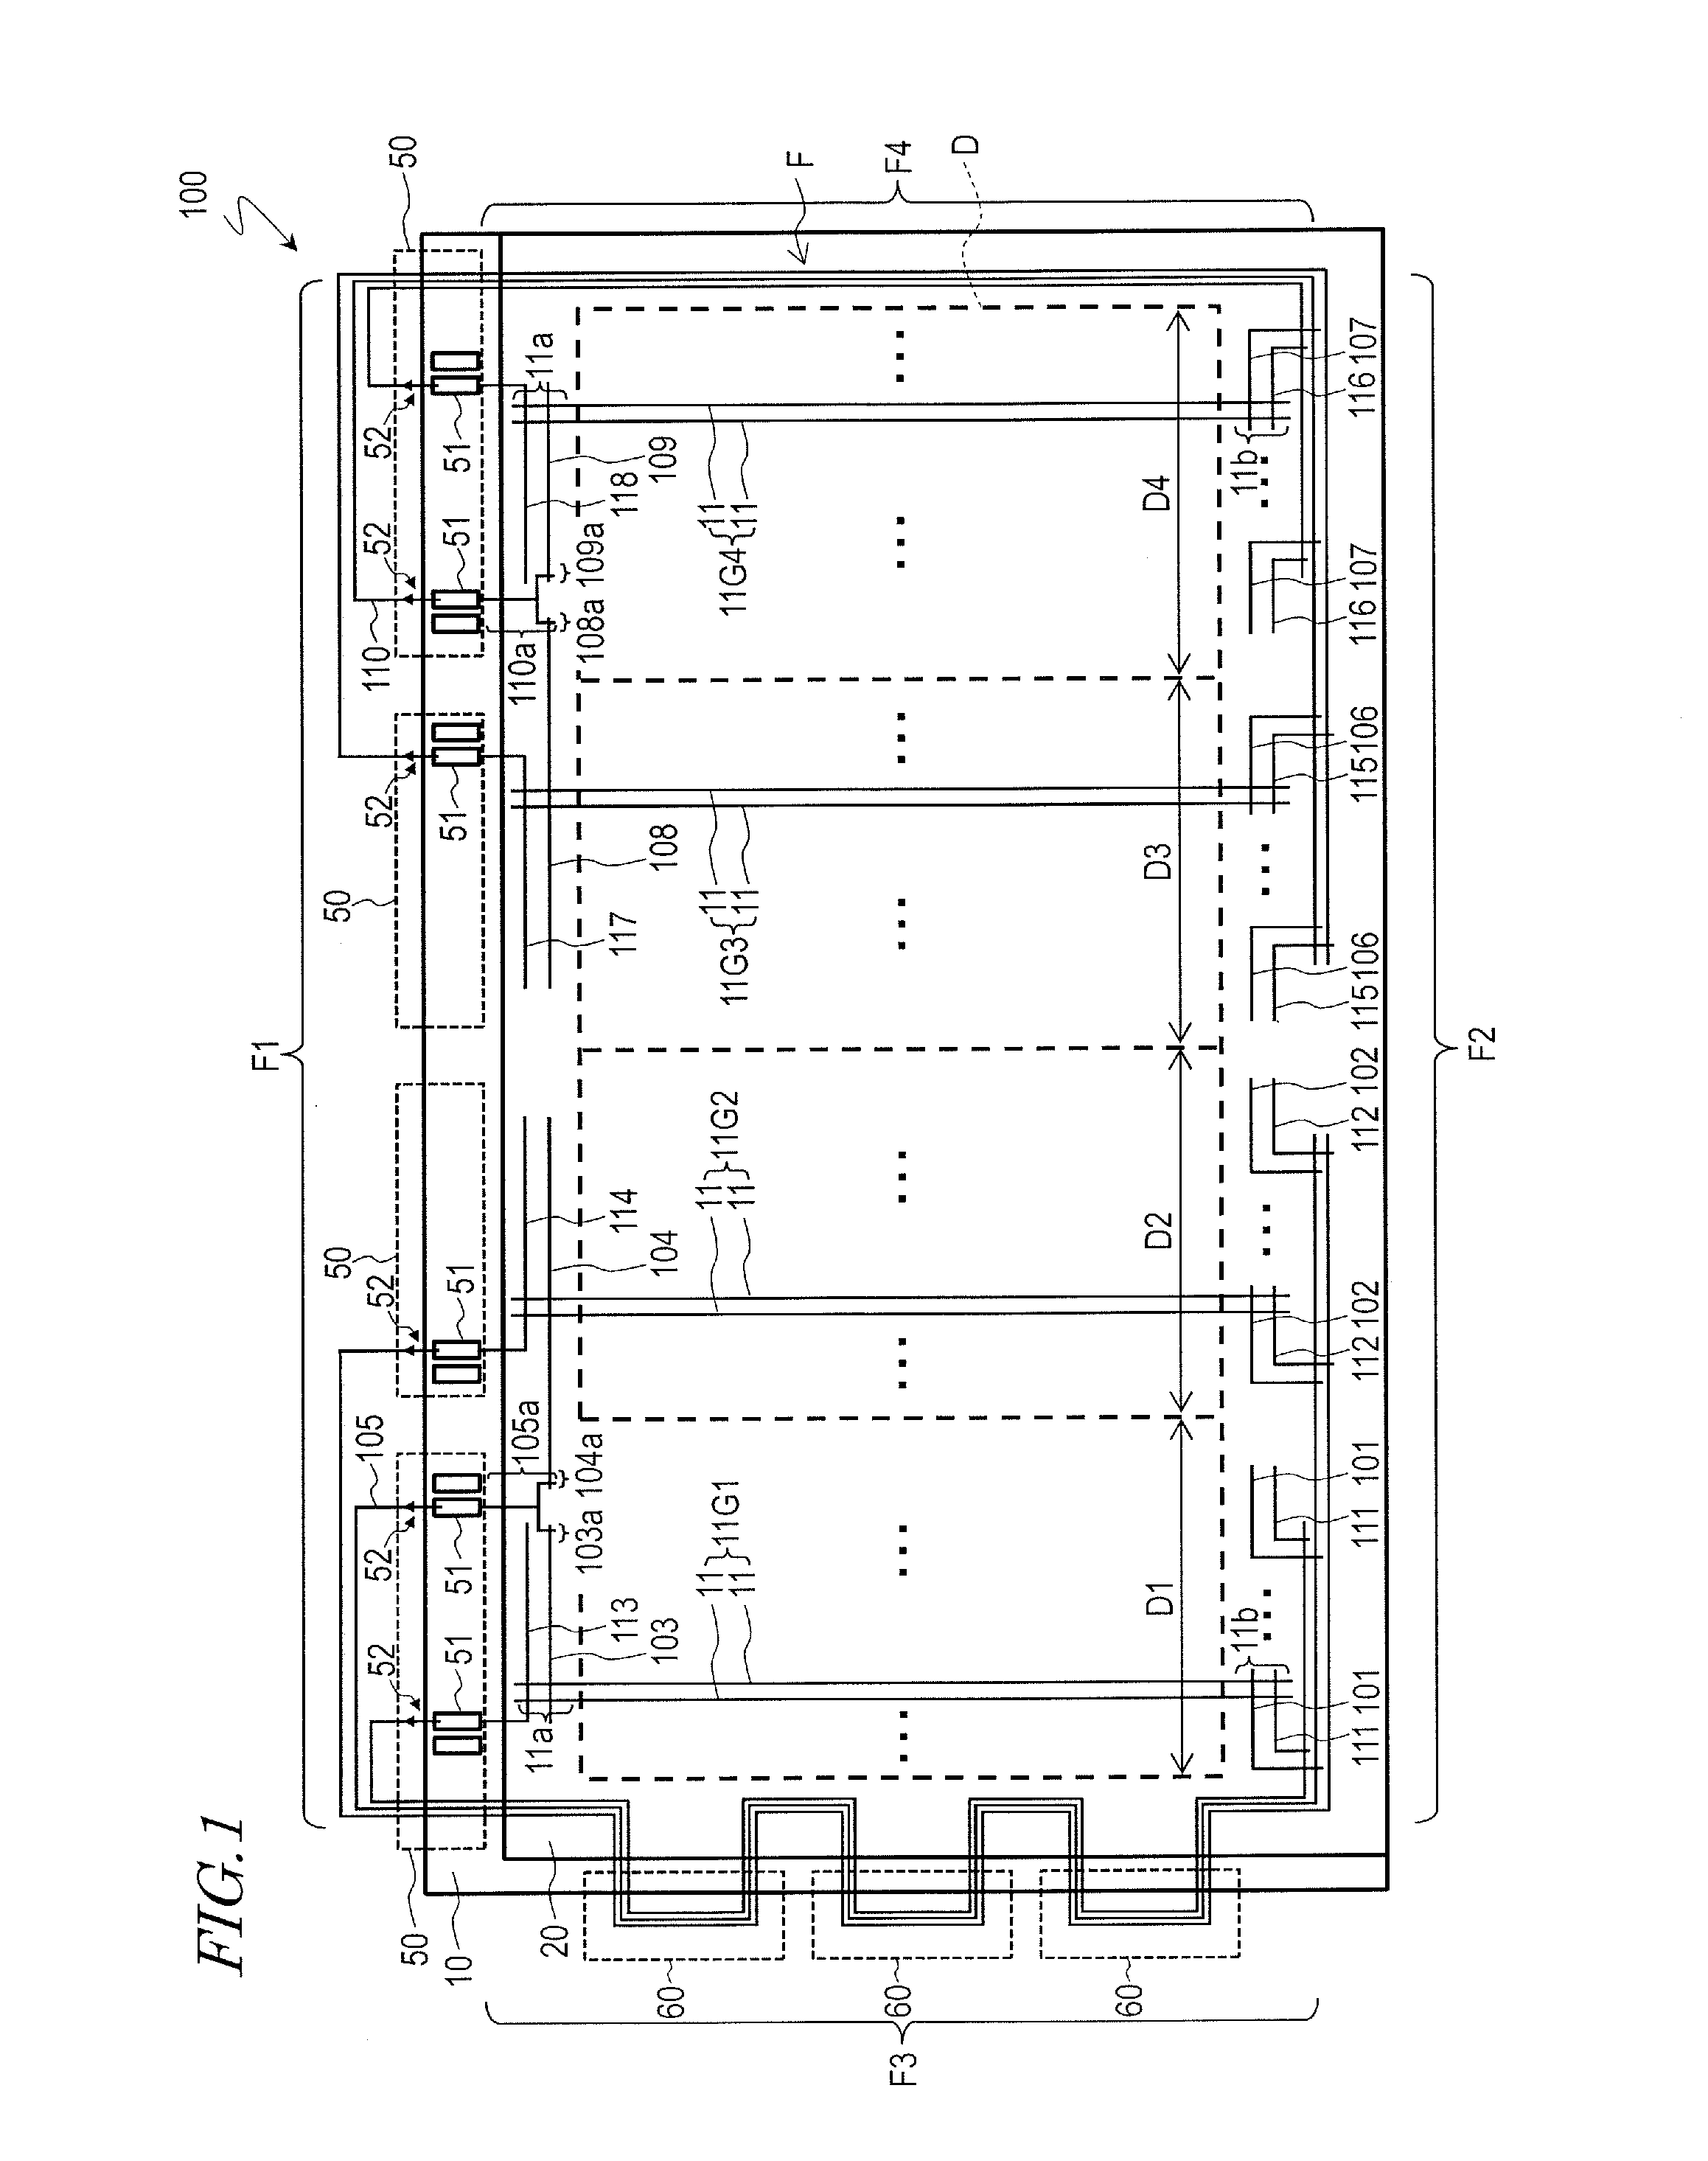 Active matrix substrate, display device, defect modification method for display device, and method for manufacturing display device